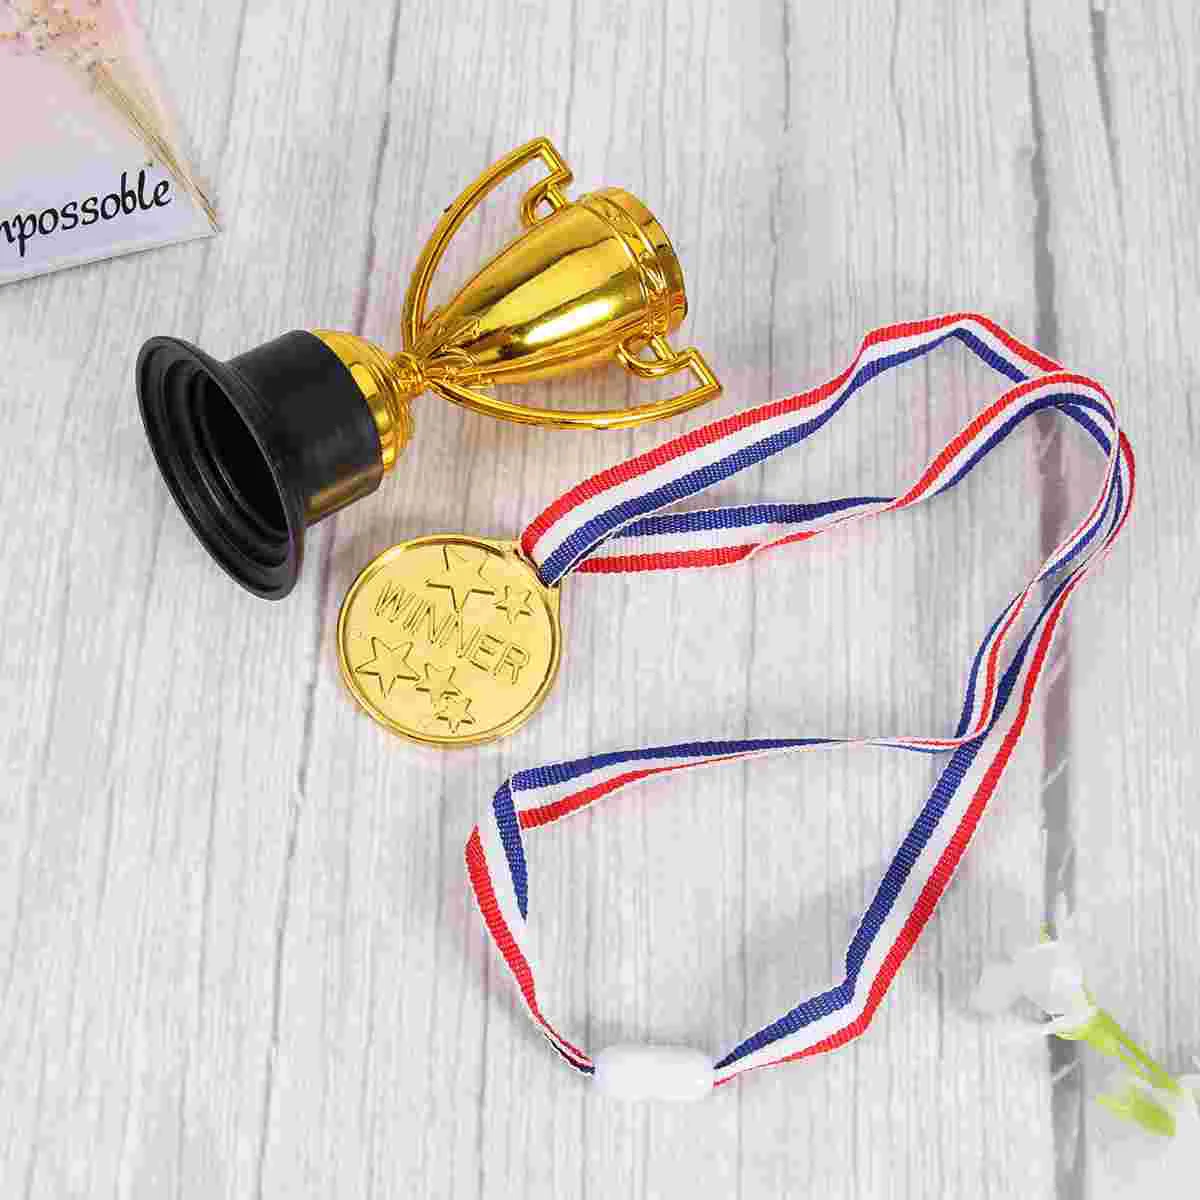 

Trophy Medals Kids Trophies Awards Gold Medal Mini Award Winner Prizes Soccer Reward Cup Cups Gift Party Sports Favor Ribbons